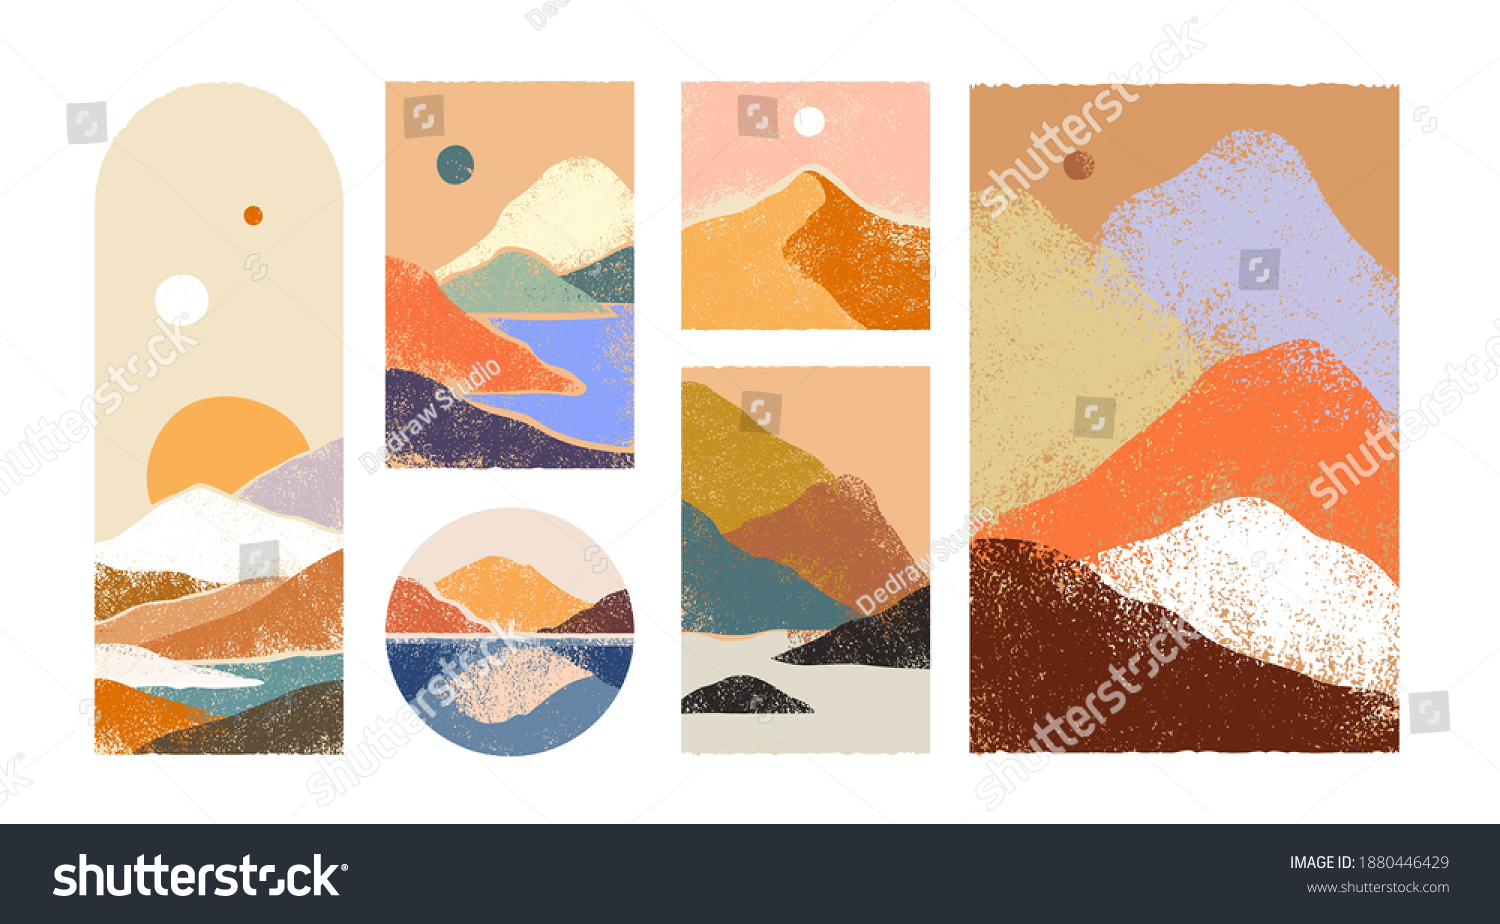 SVG of Big set of abstract mountain landscape collection. Trendy hand drawn mural art backgrounds of diverse travel scenery painting. Nature environment, coast biome, multicolor hills, desert dunes. svg